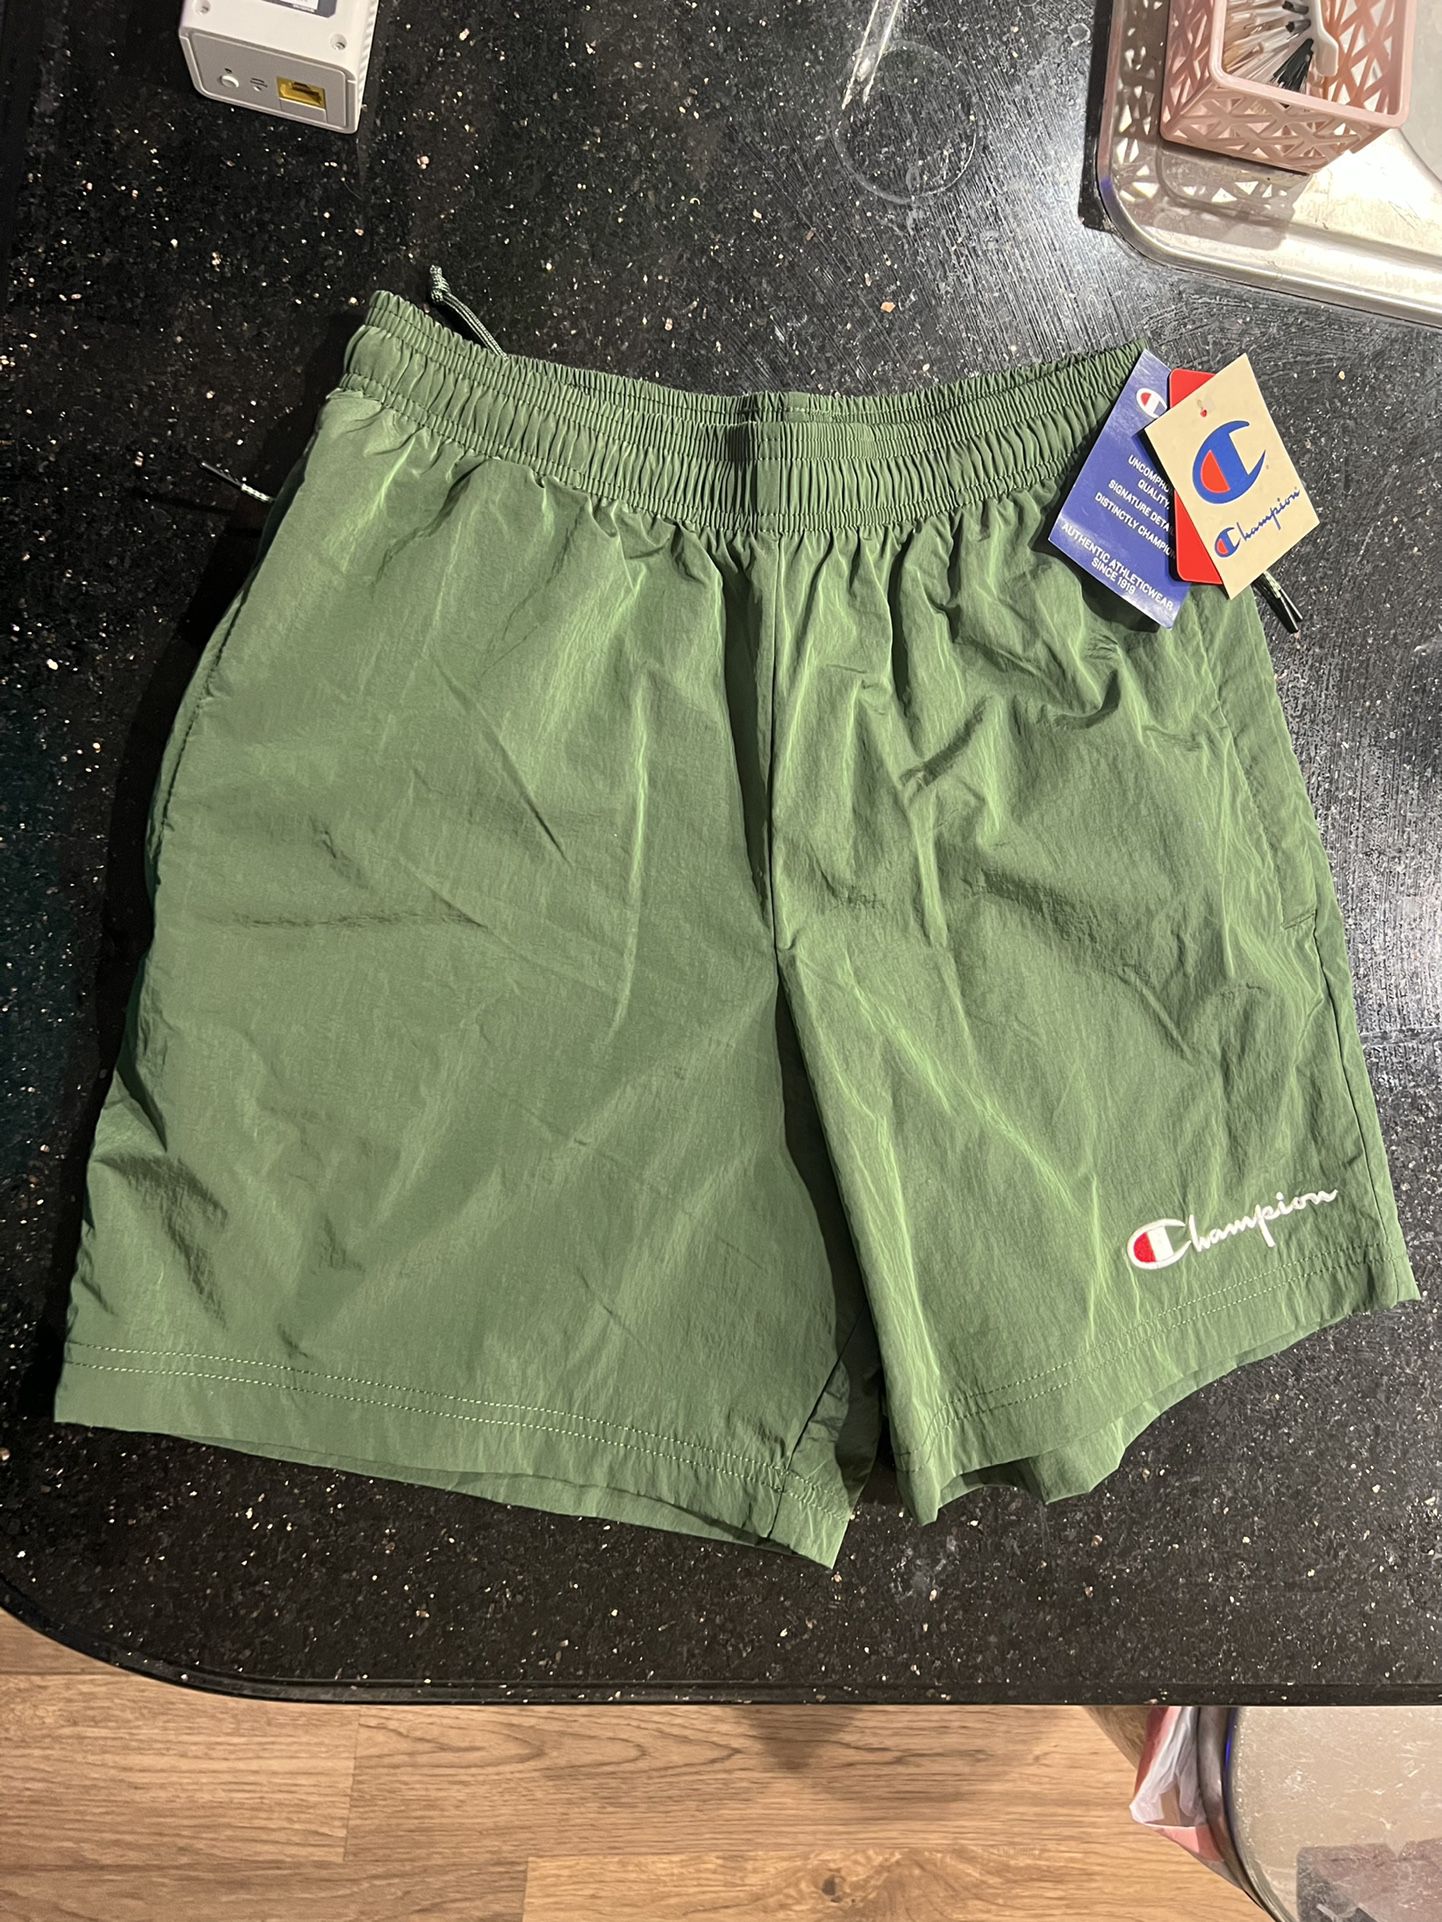 Gucci boxer's for Sale in Los Angeles, CA - OfferUp